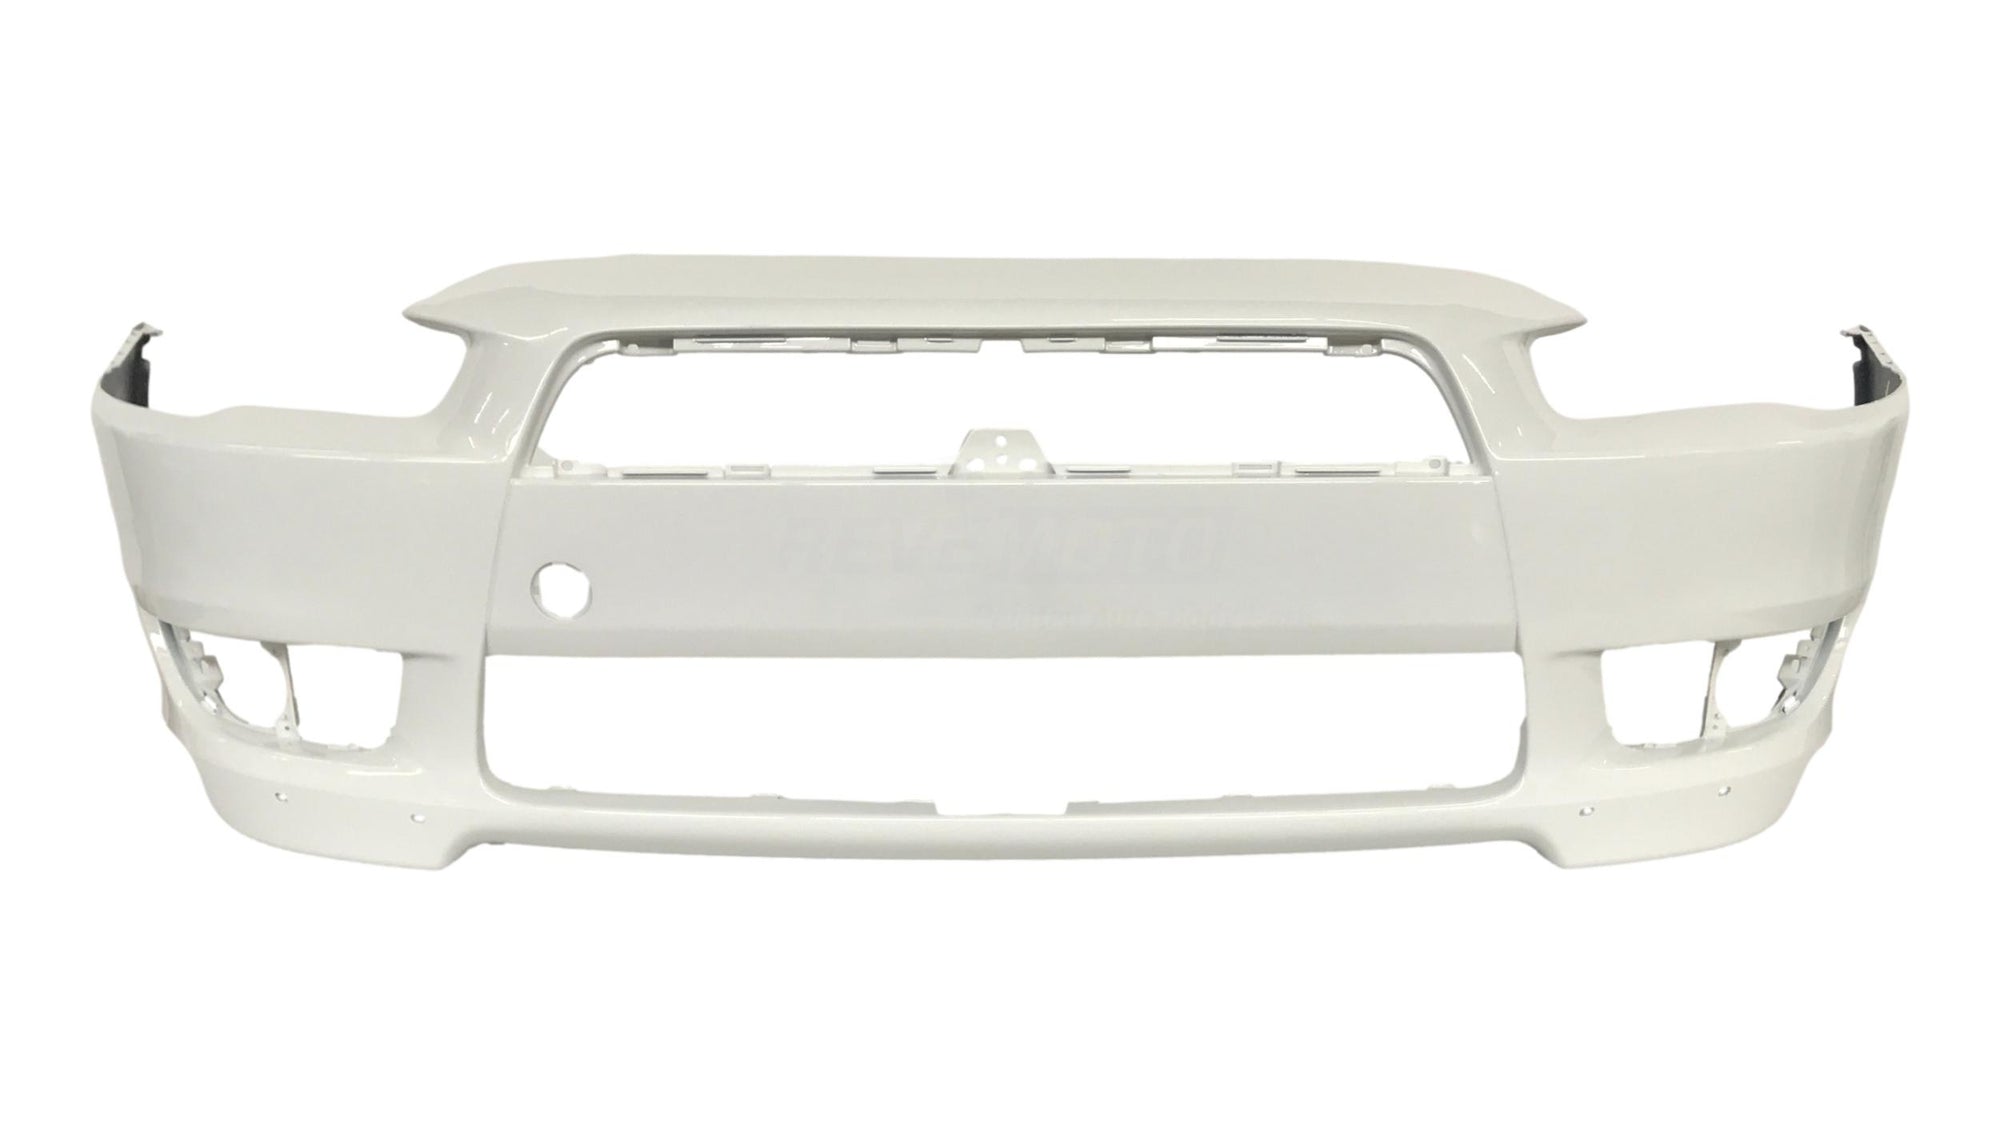 2008-2012 Mitsubishi Lancer Front Bumper Painted Wicked White (W37) 6400B914 OEM